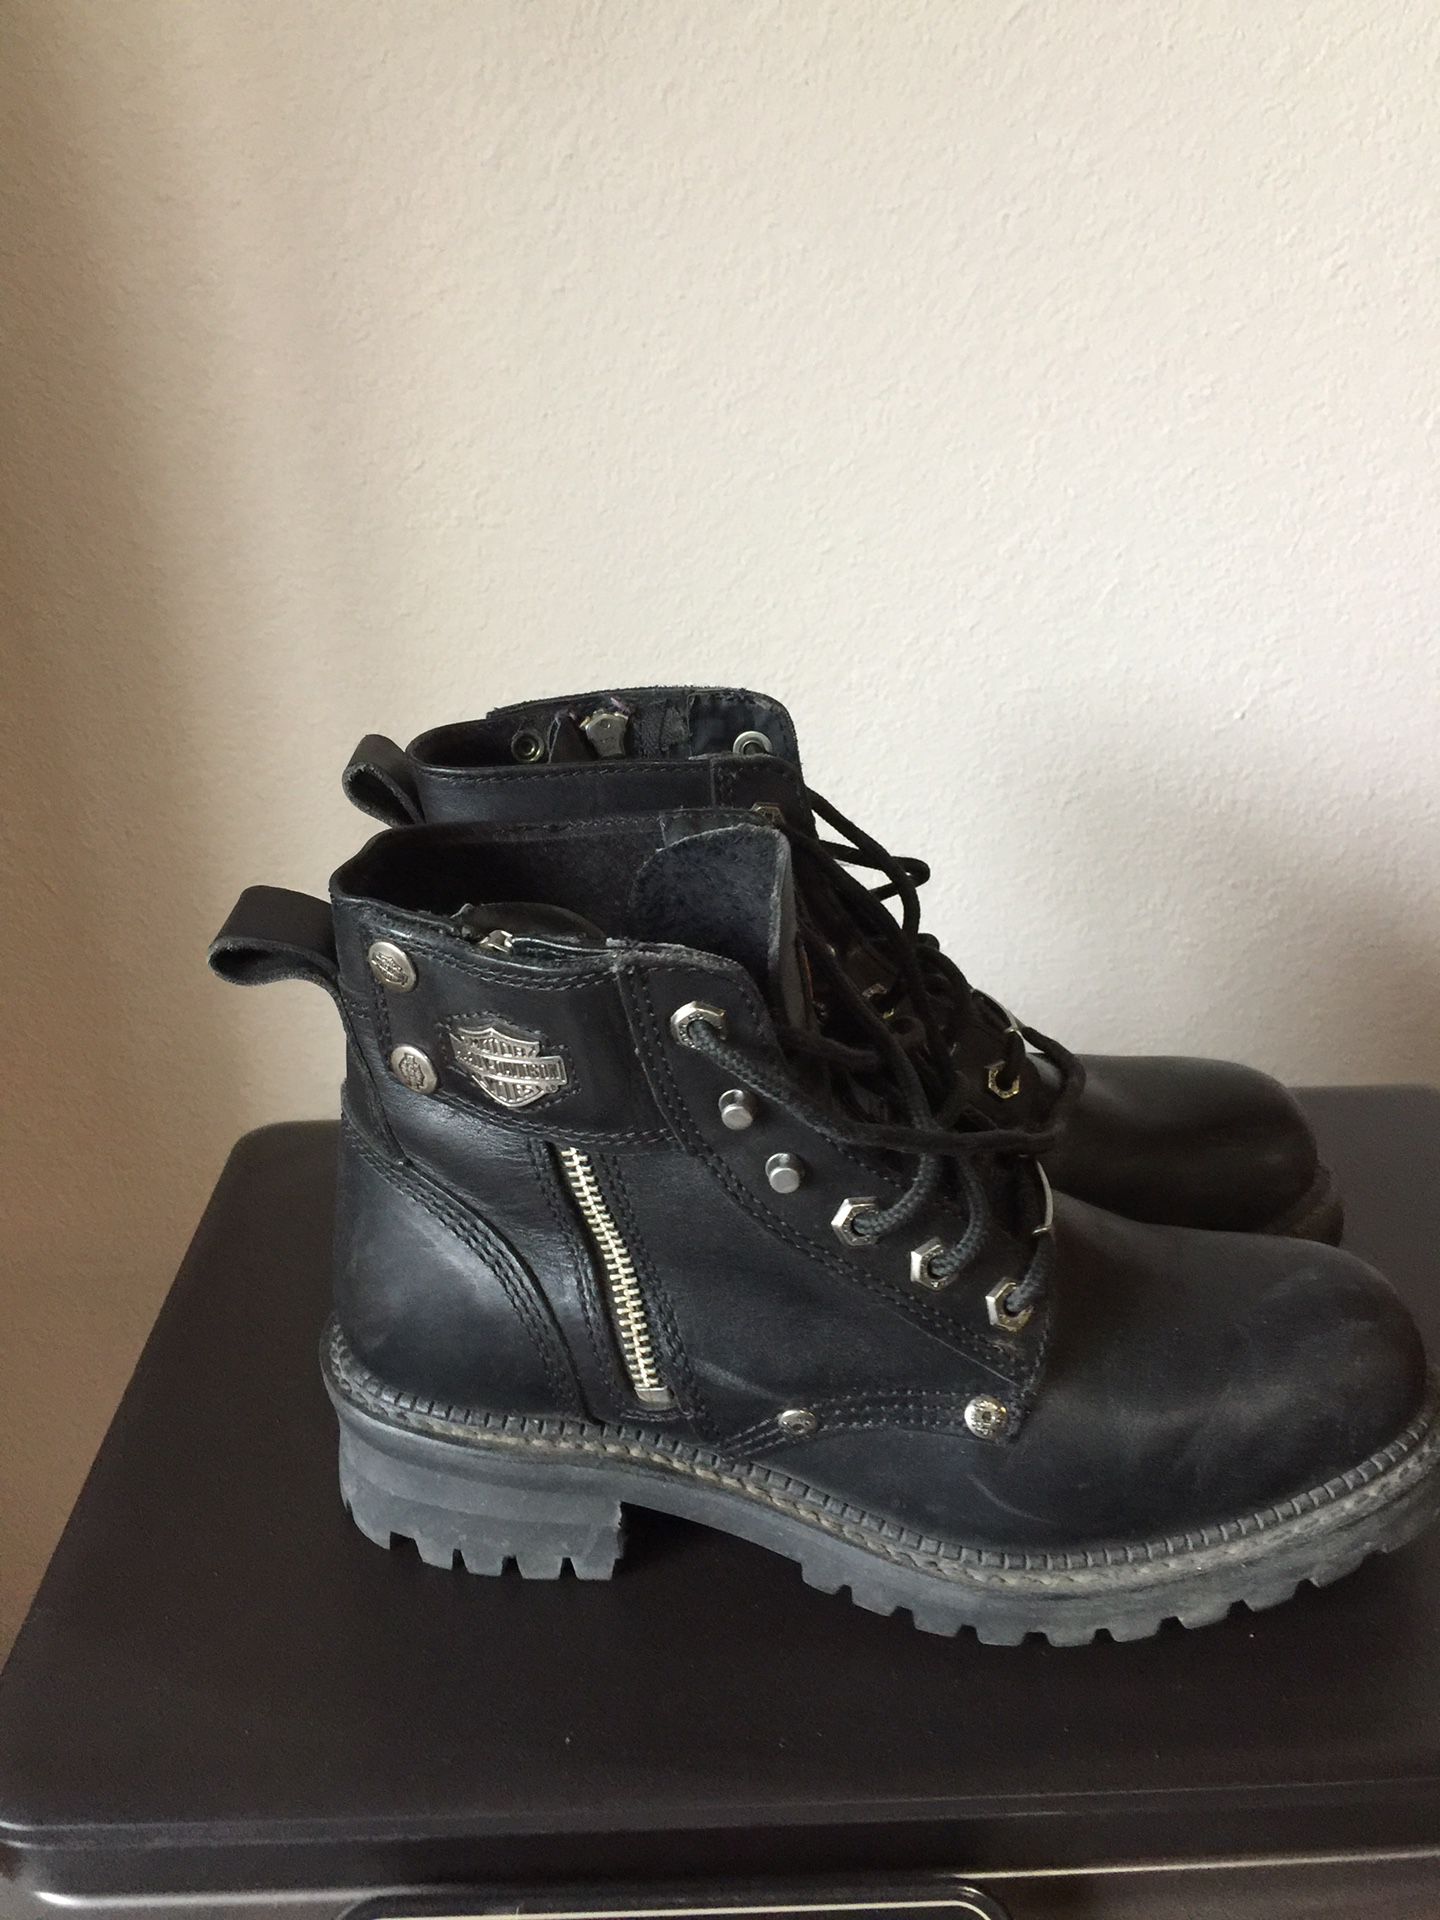 Harley Davidson Ladies Motorcycle Boots Size 8 (run a little big)